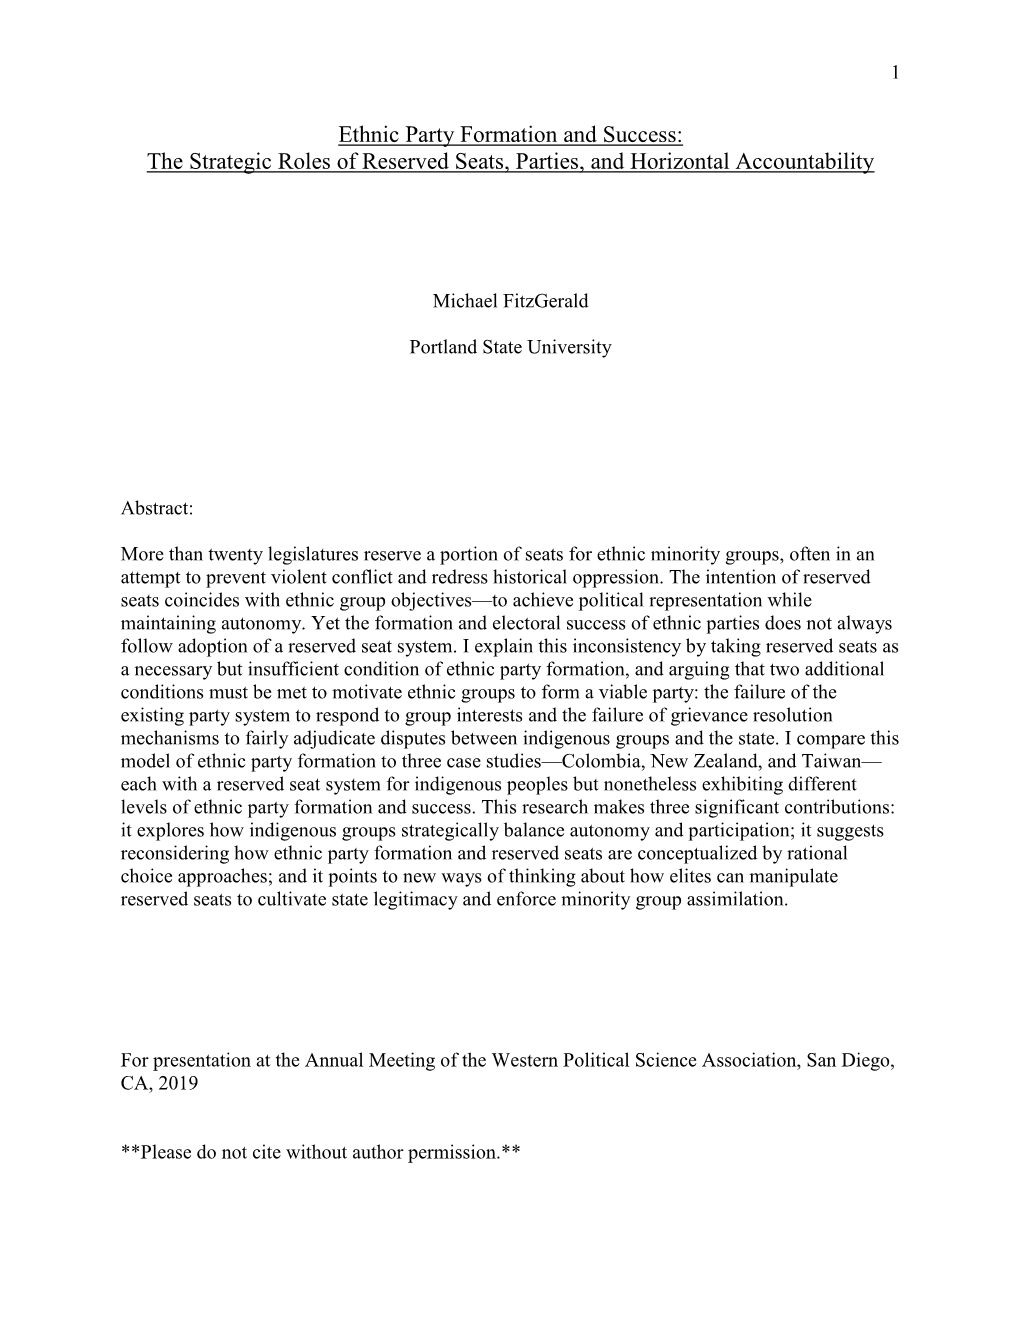 Ethnic Party Formation and Success: the Strategic Roles of Reserved Seats, Parties, and Horizontal Accountability